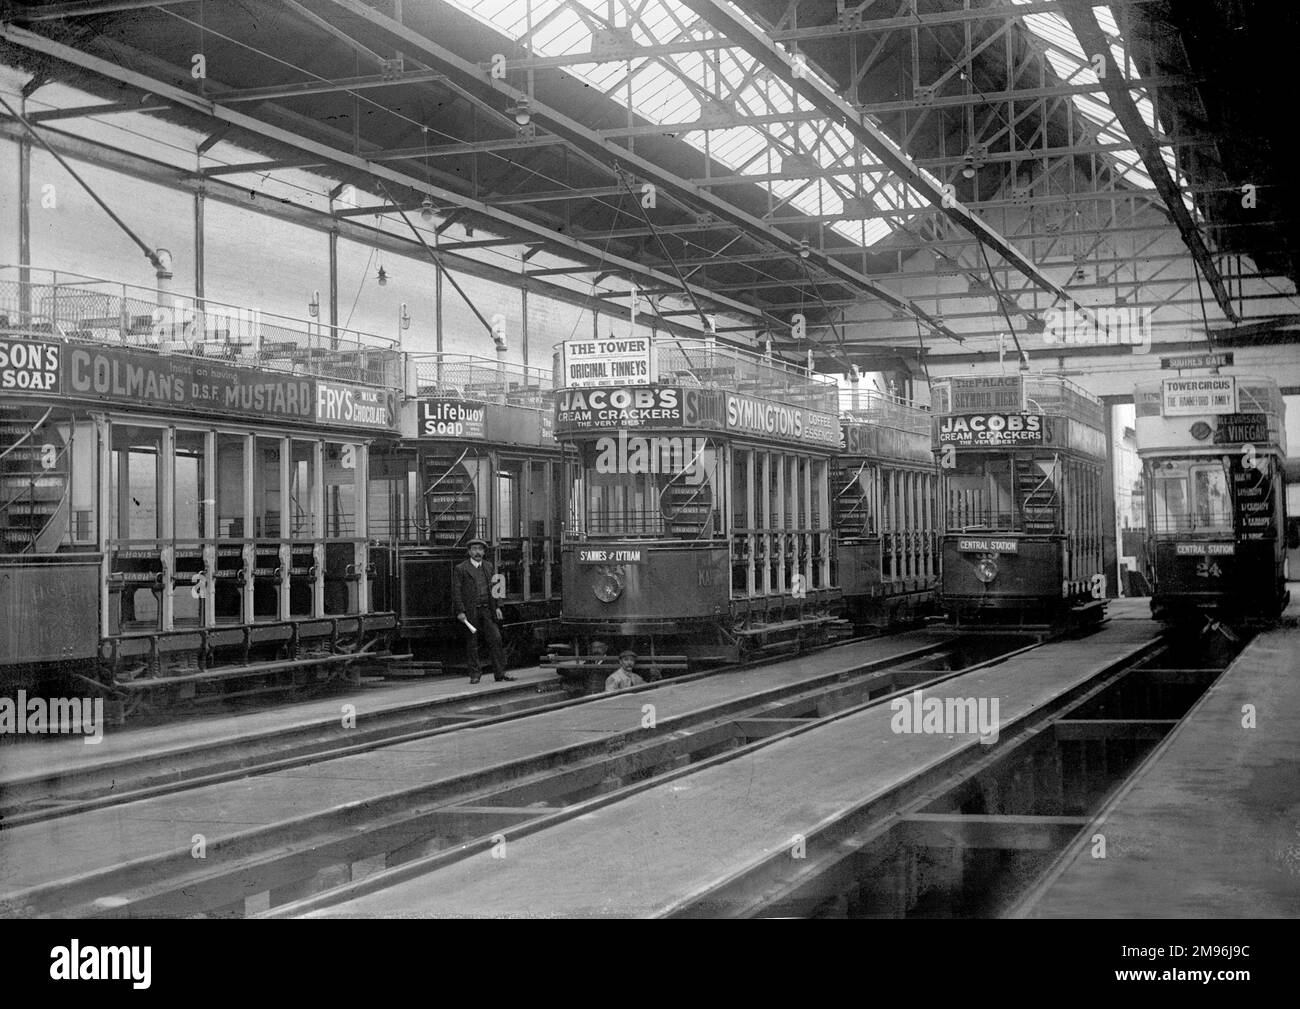 Interior view of a tramshed at Lytham St Annes, Lancashire, showing various trams with advertising material: Jacob's Cream Crackers, Colman's Mustard, Lifebuoy Soap, Fry's Milk Chocolate and Symington's Coffee Essence.  Seymour Hicks is appearing at the Palace, the Hanneford Family at the Tower Circus, and the Original Finneys at the Tower (Blackpool). Stock Photo